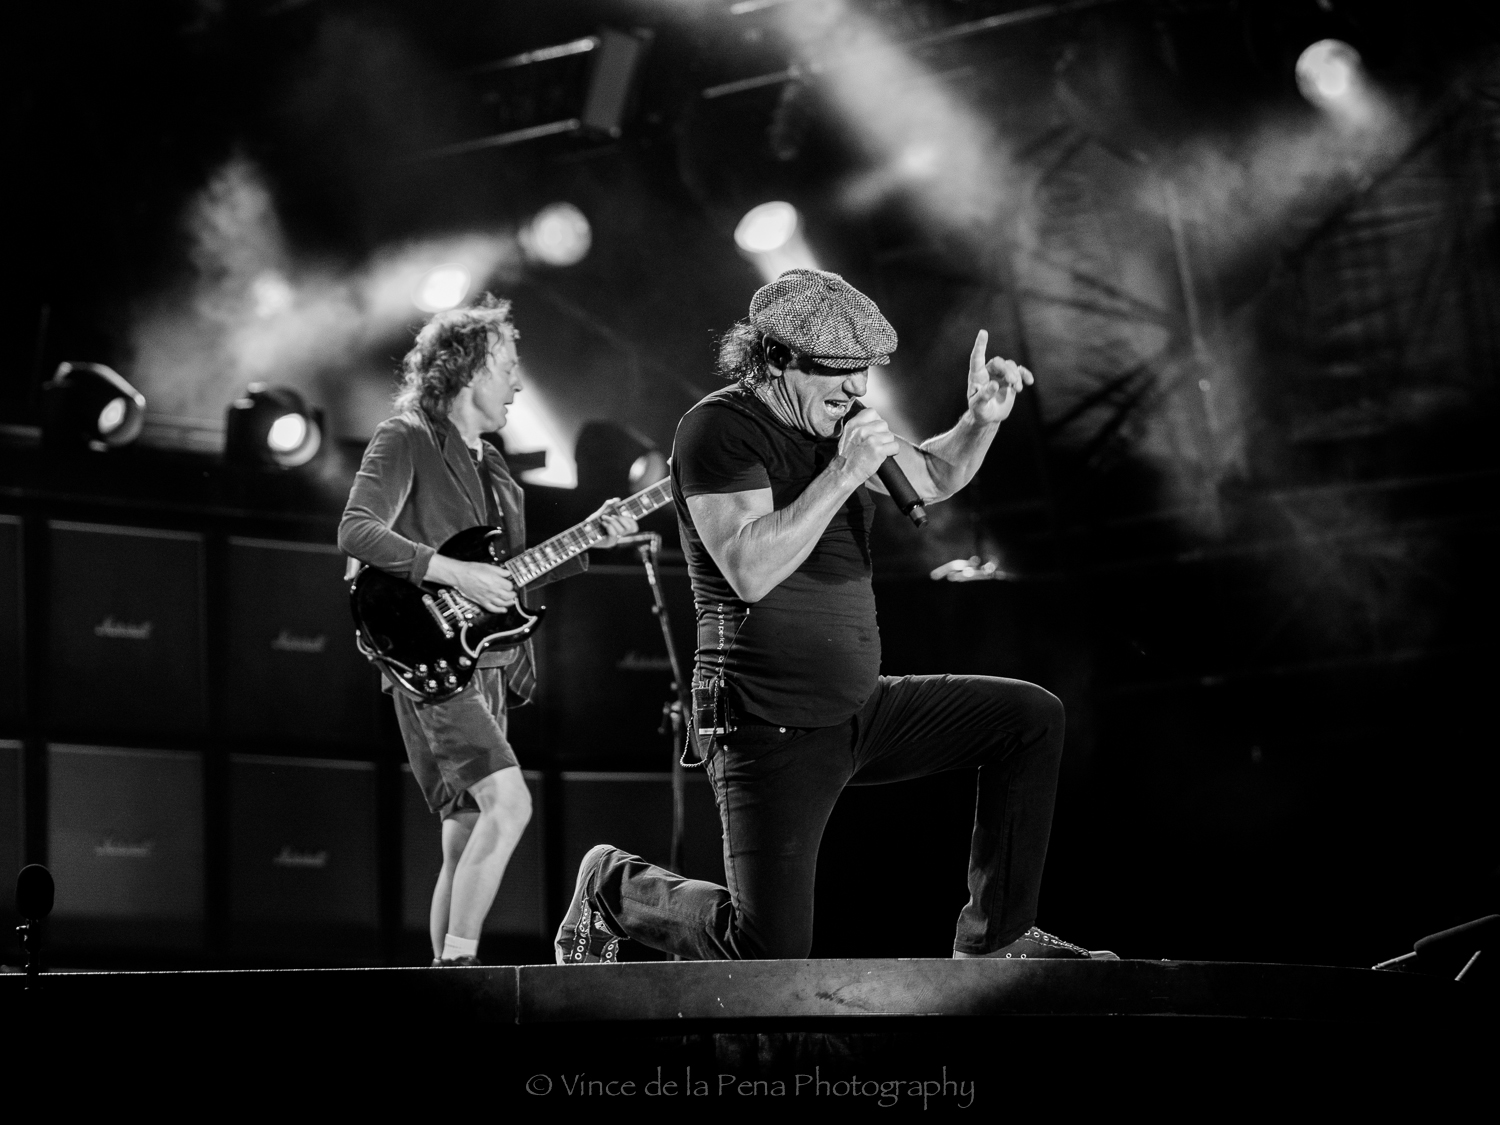 AC/DC: Back in Black (and White) with an by Vince de la Pena | Steve and Photo